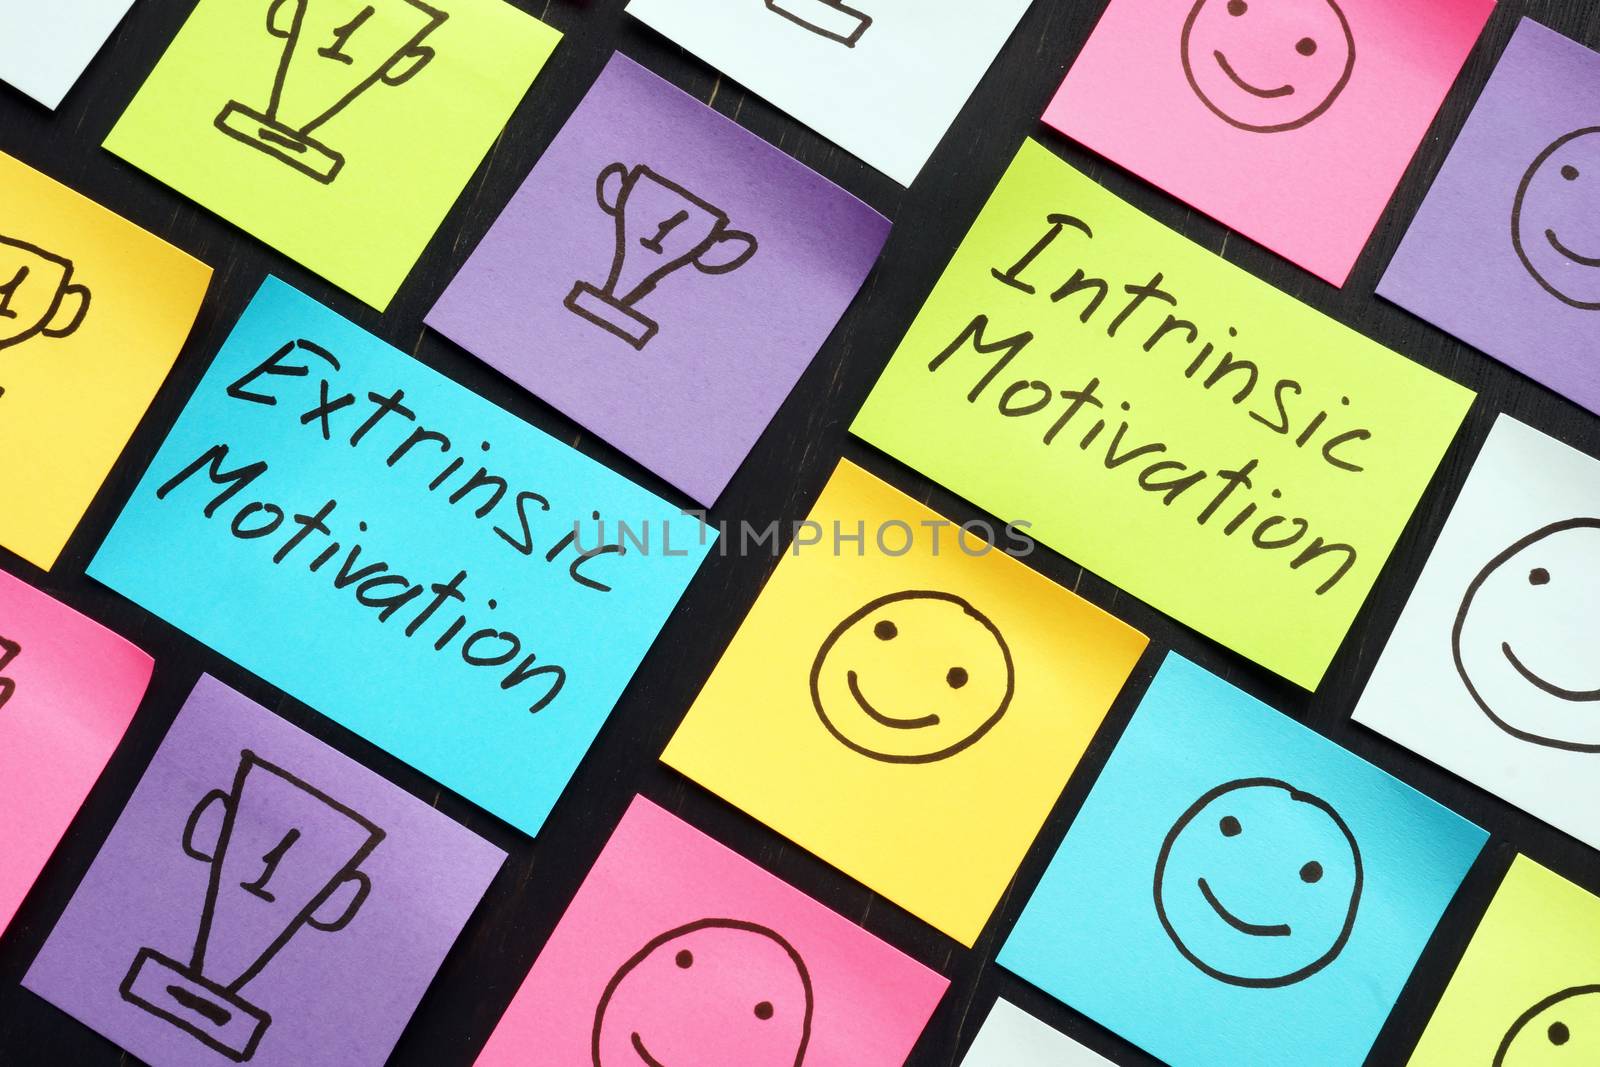 Extrinsic and intrinsic motivation signs and small memo sticks. by designer491